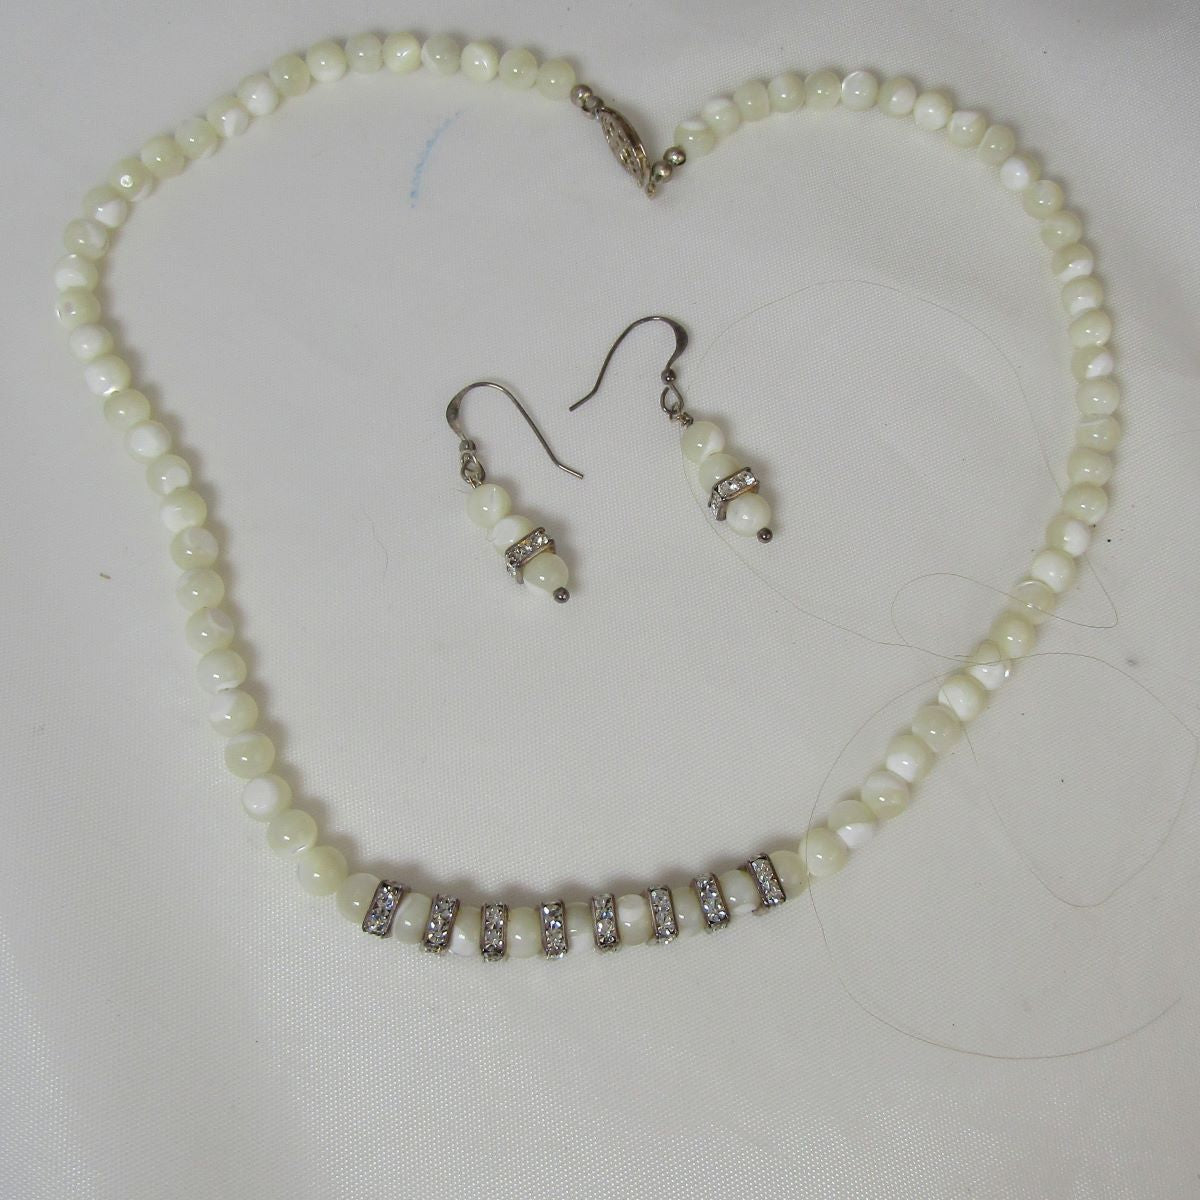 Mother of Pearl Necklace and Earrings for your Wedding Day - VP's Jewelry  